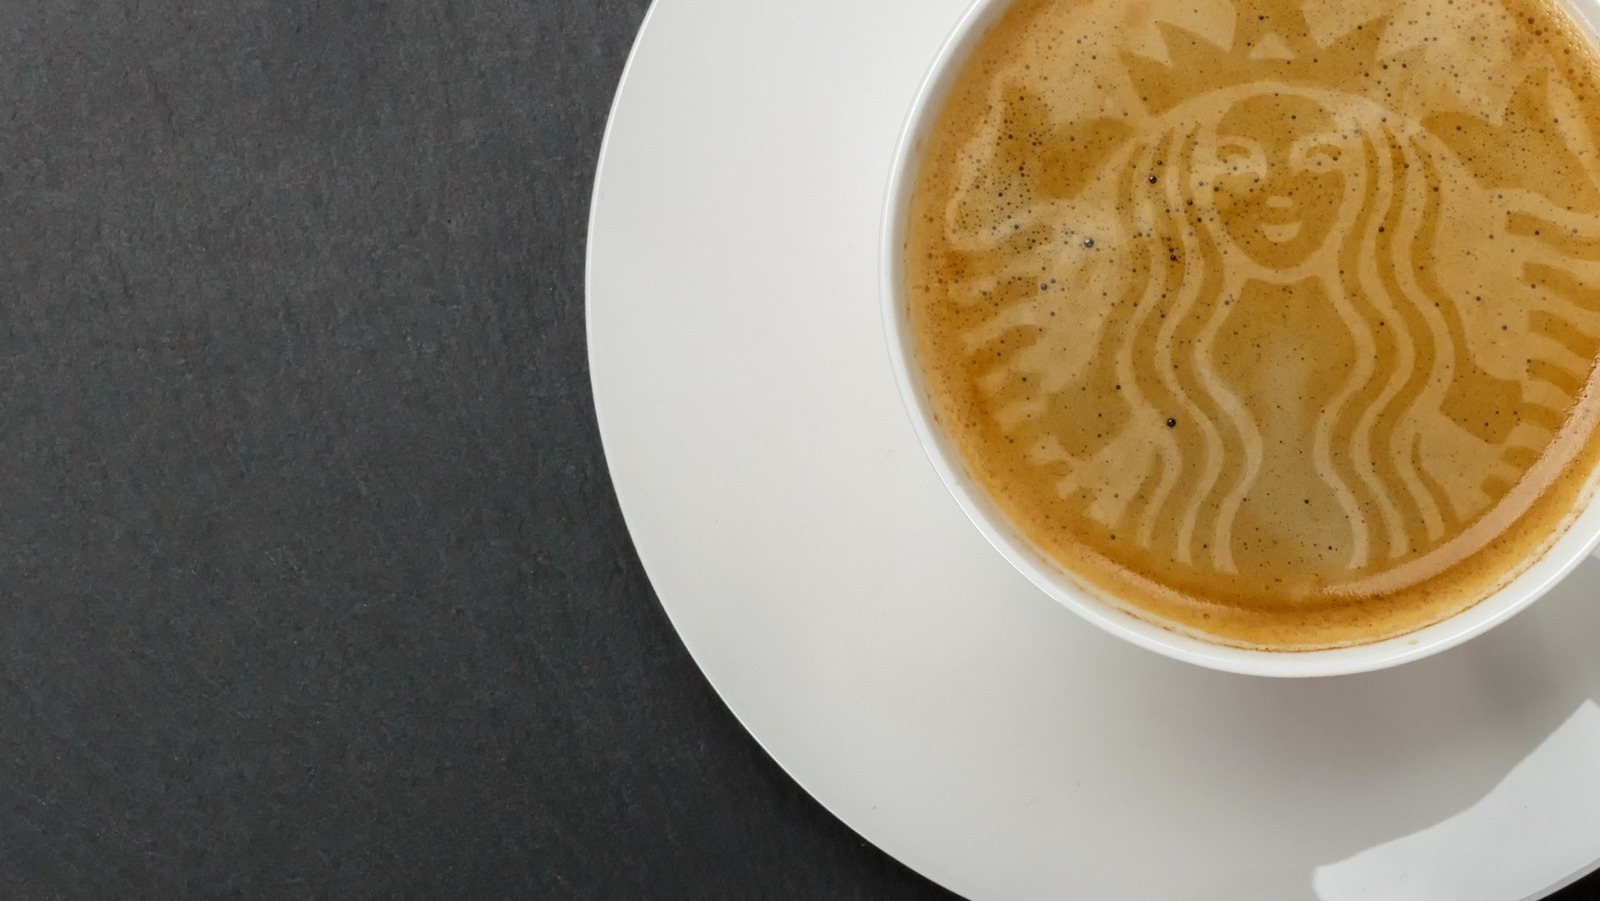 What Does It Mean To Have A Handcrafted Drink At Starbucks?